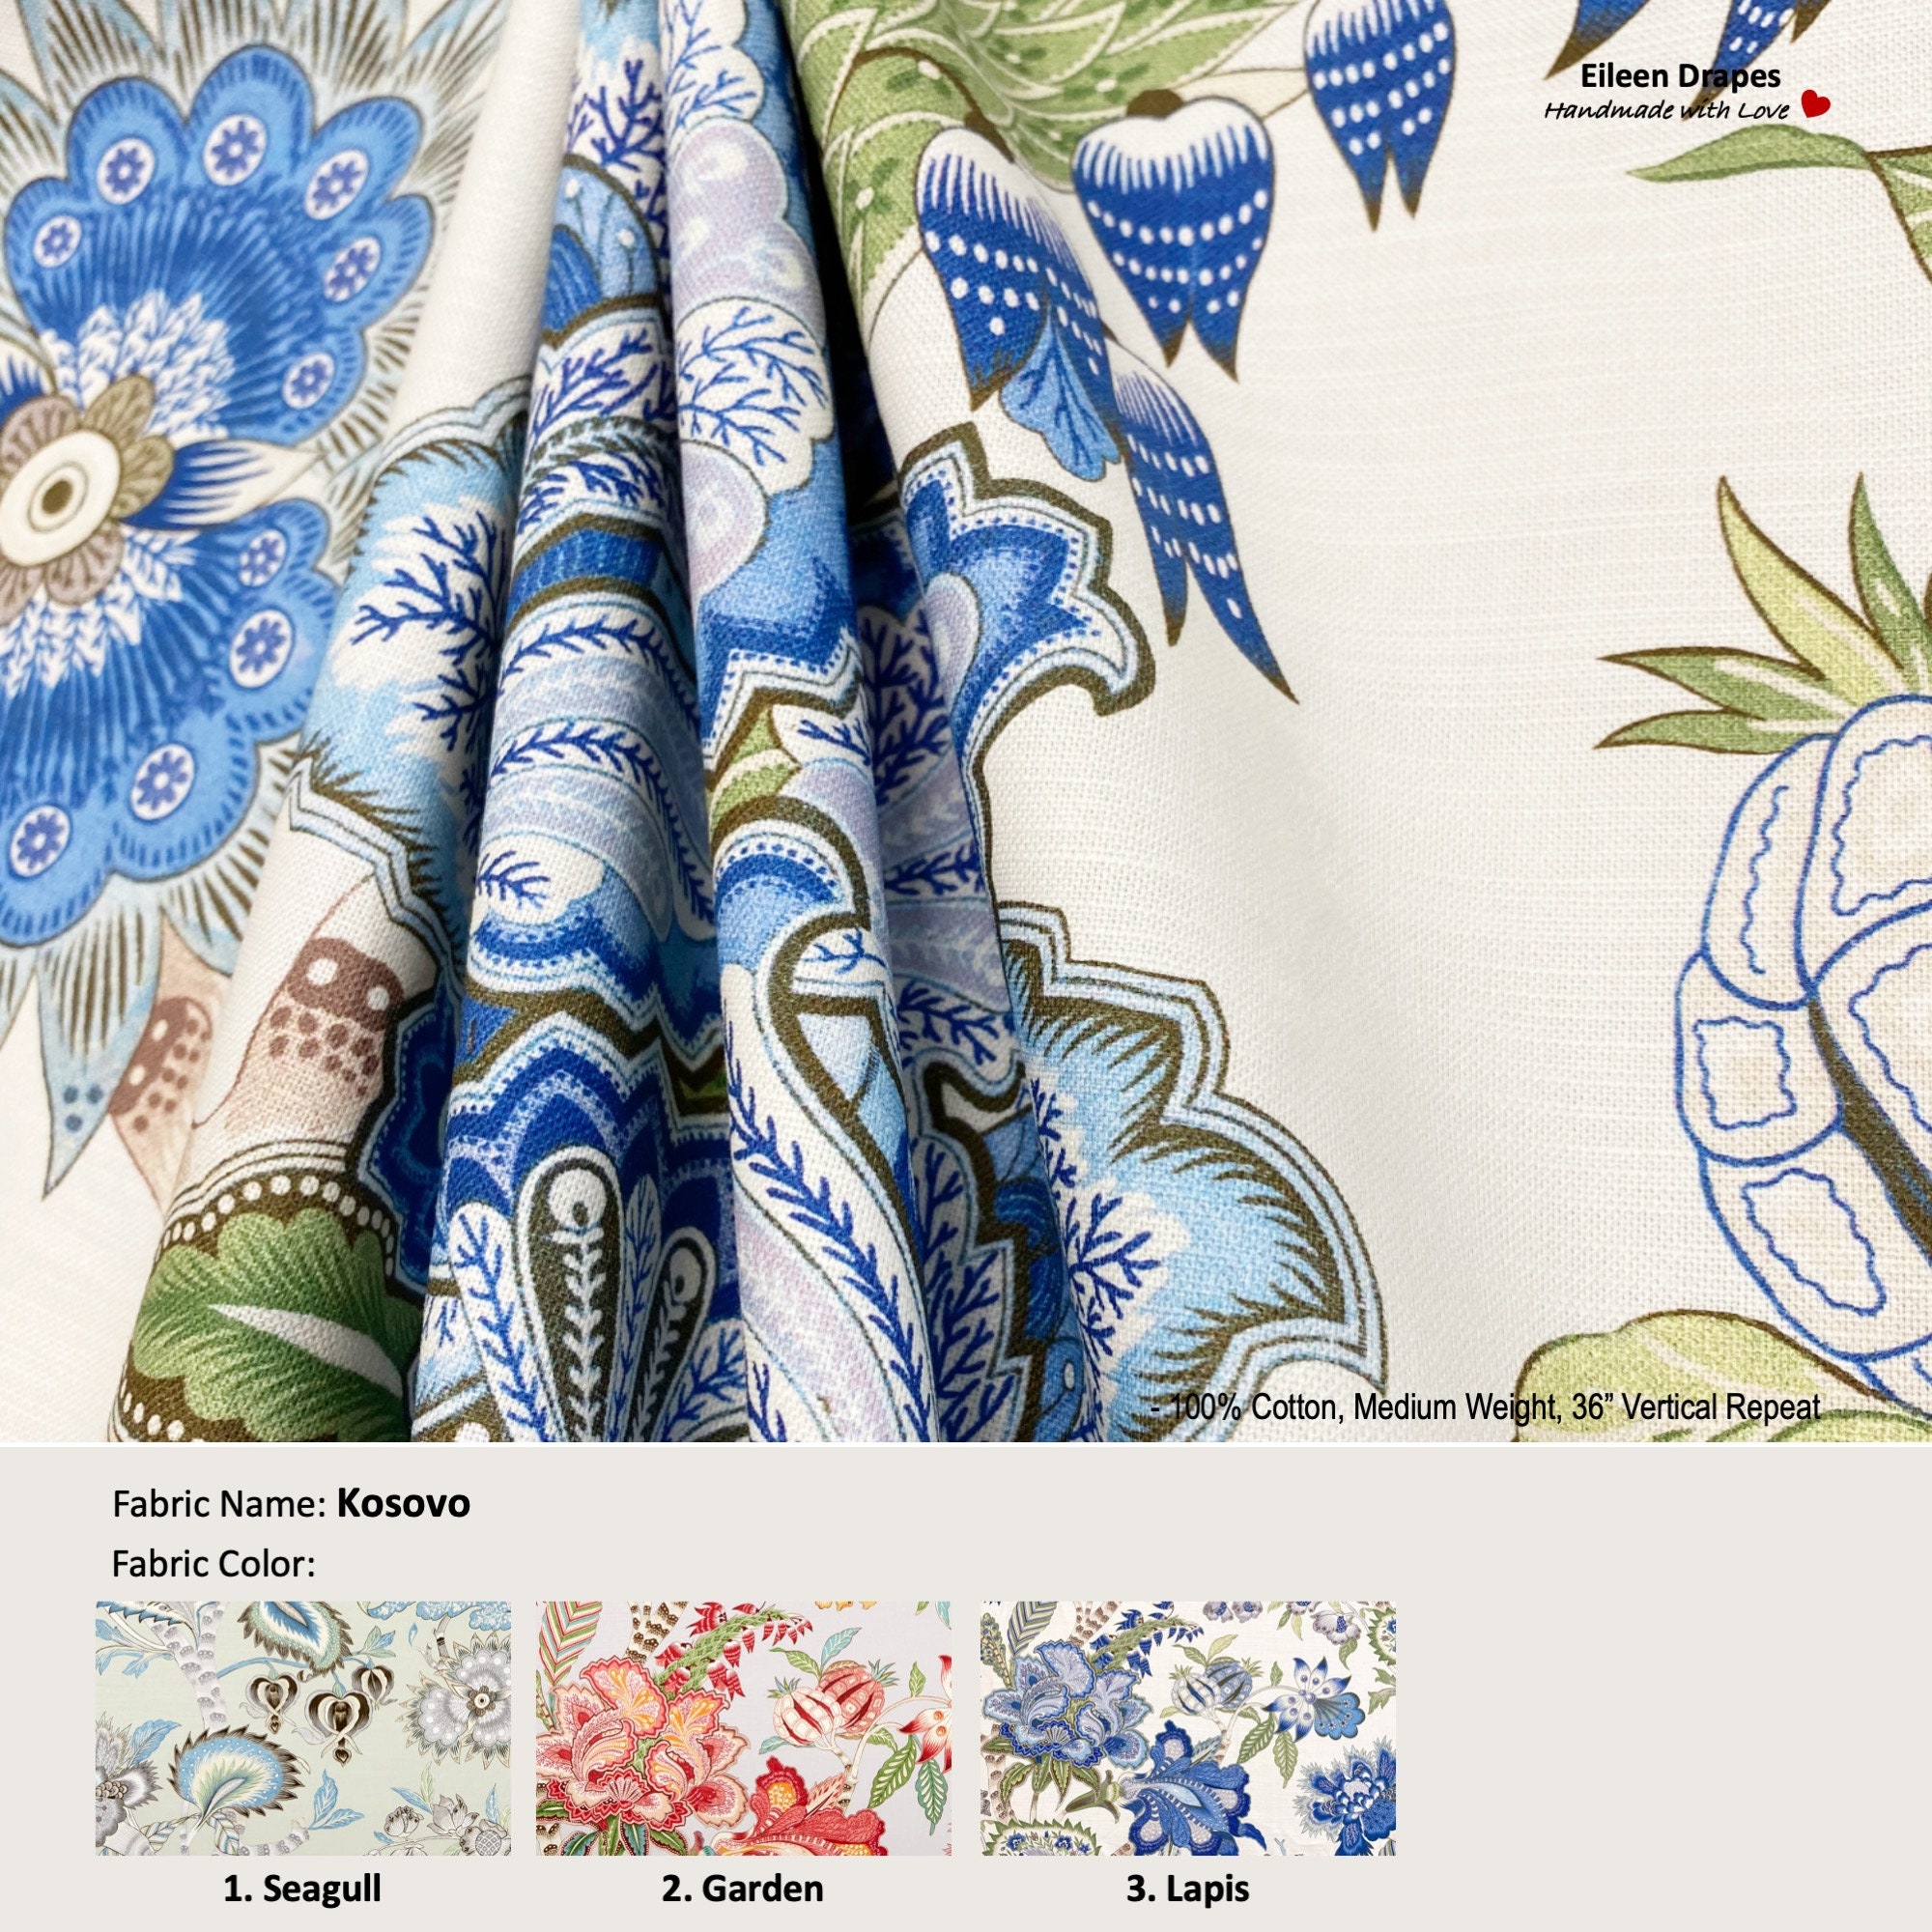 Blue & White Jacobean Floral Fabric, Vintage-style Fabric, 100